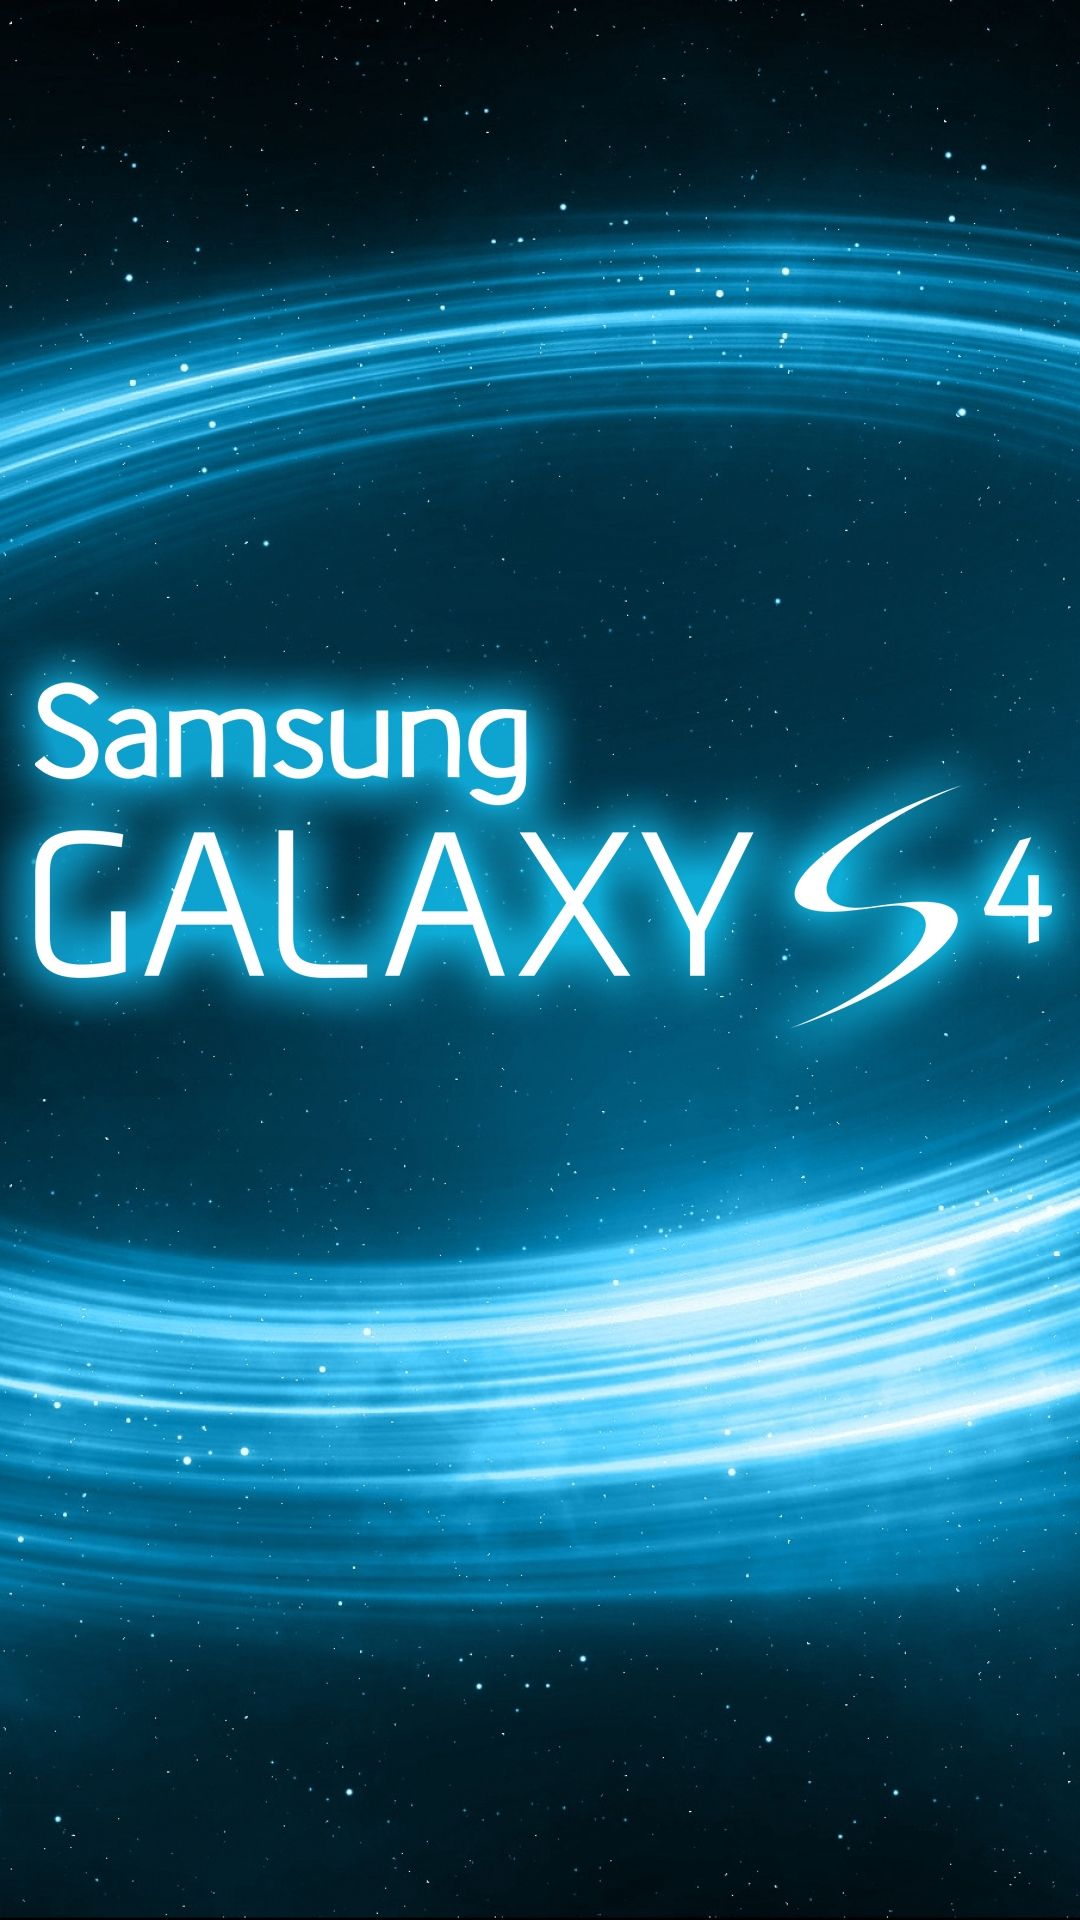 Free download Samsung Galaxy S4 Wallpaper Picture HD Wallpaper [2160x1920] for your Desktop, Mobile & Tablet. Explore Samsung Galaxy Logo Wallpaper. Samsung Galaxy Logo Wallpaper, Samsung Galaxy Wallpaper, Samsung Galaxy Wallpaper